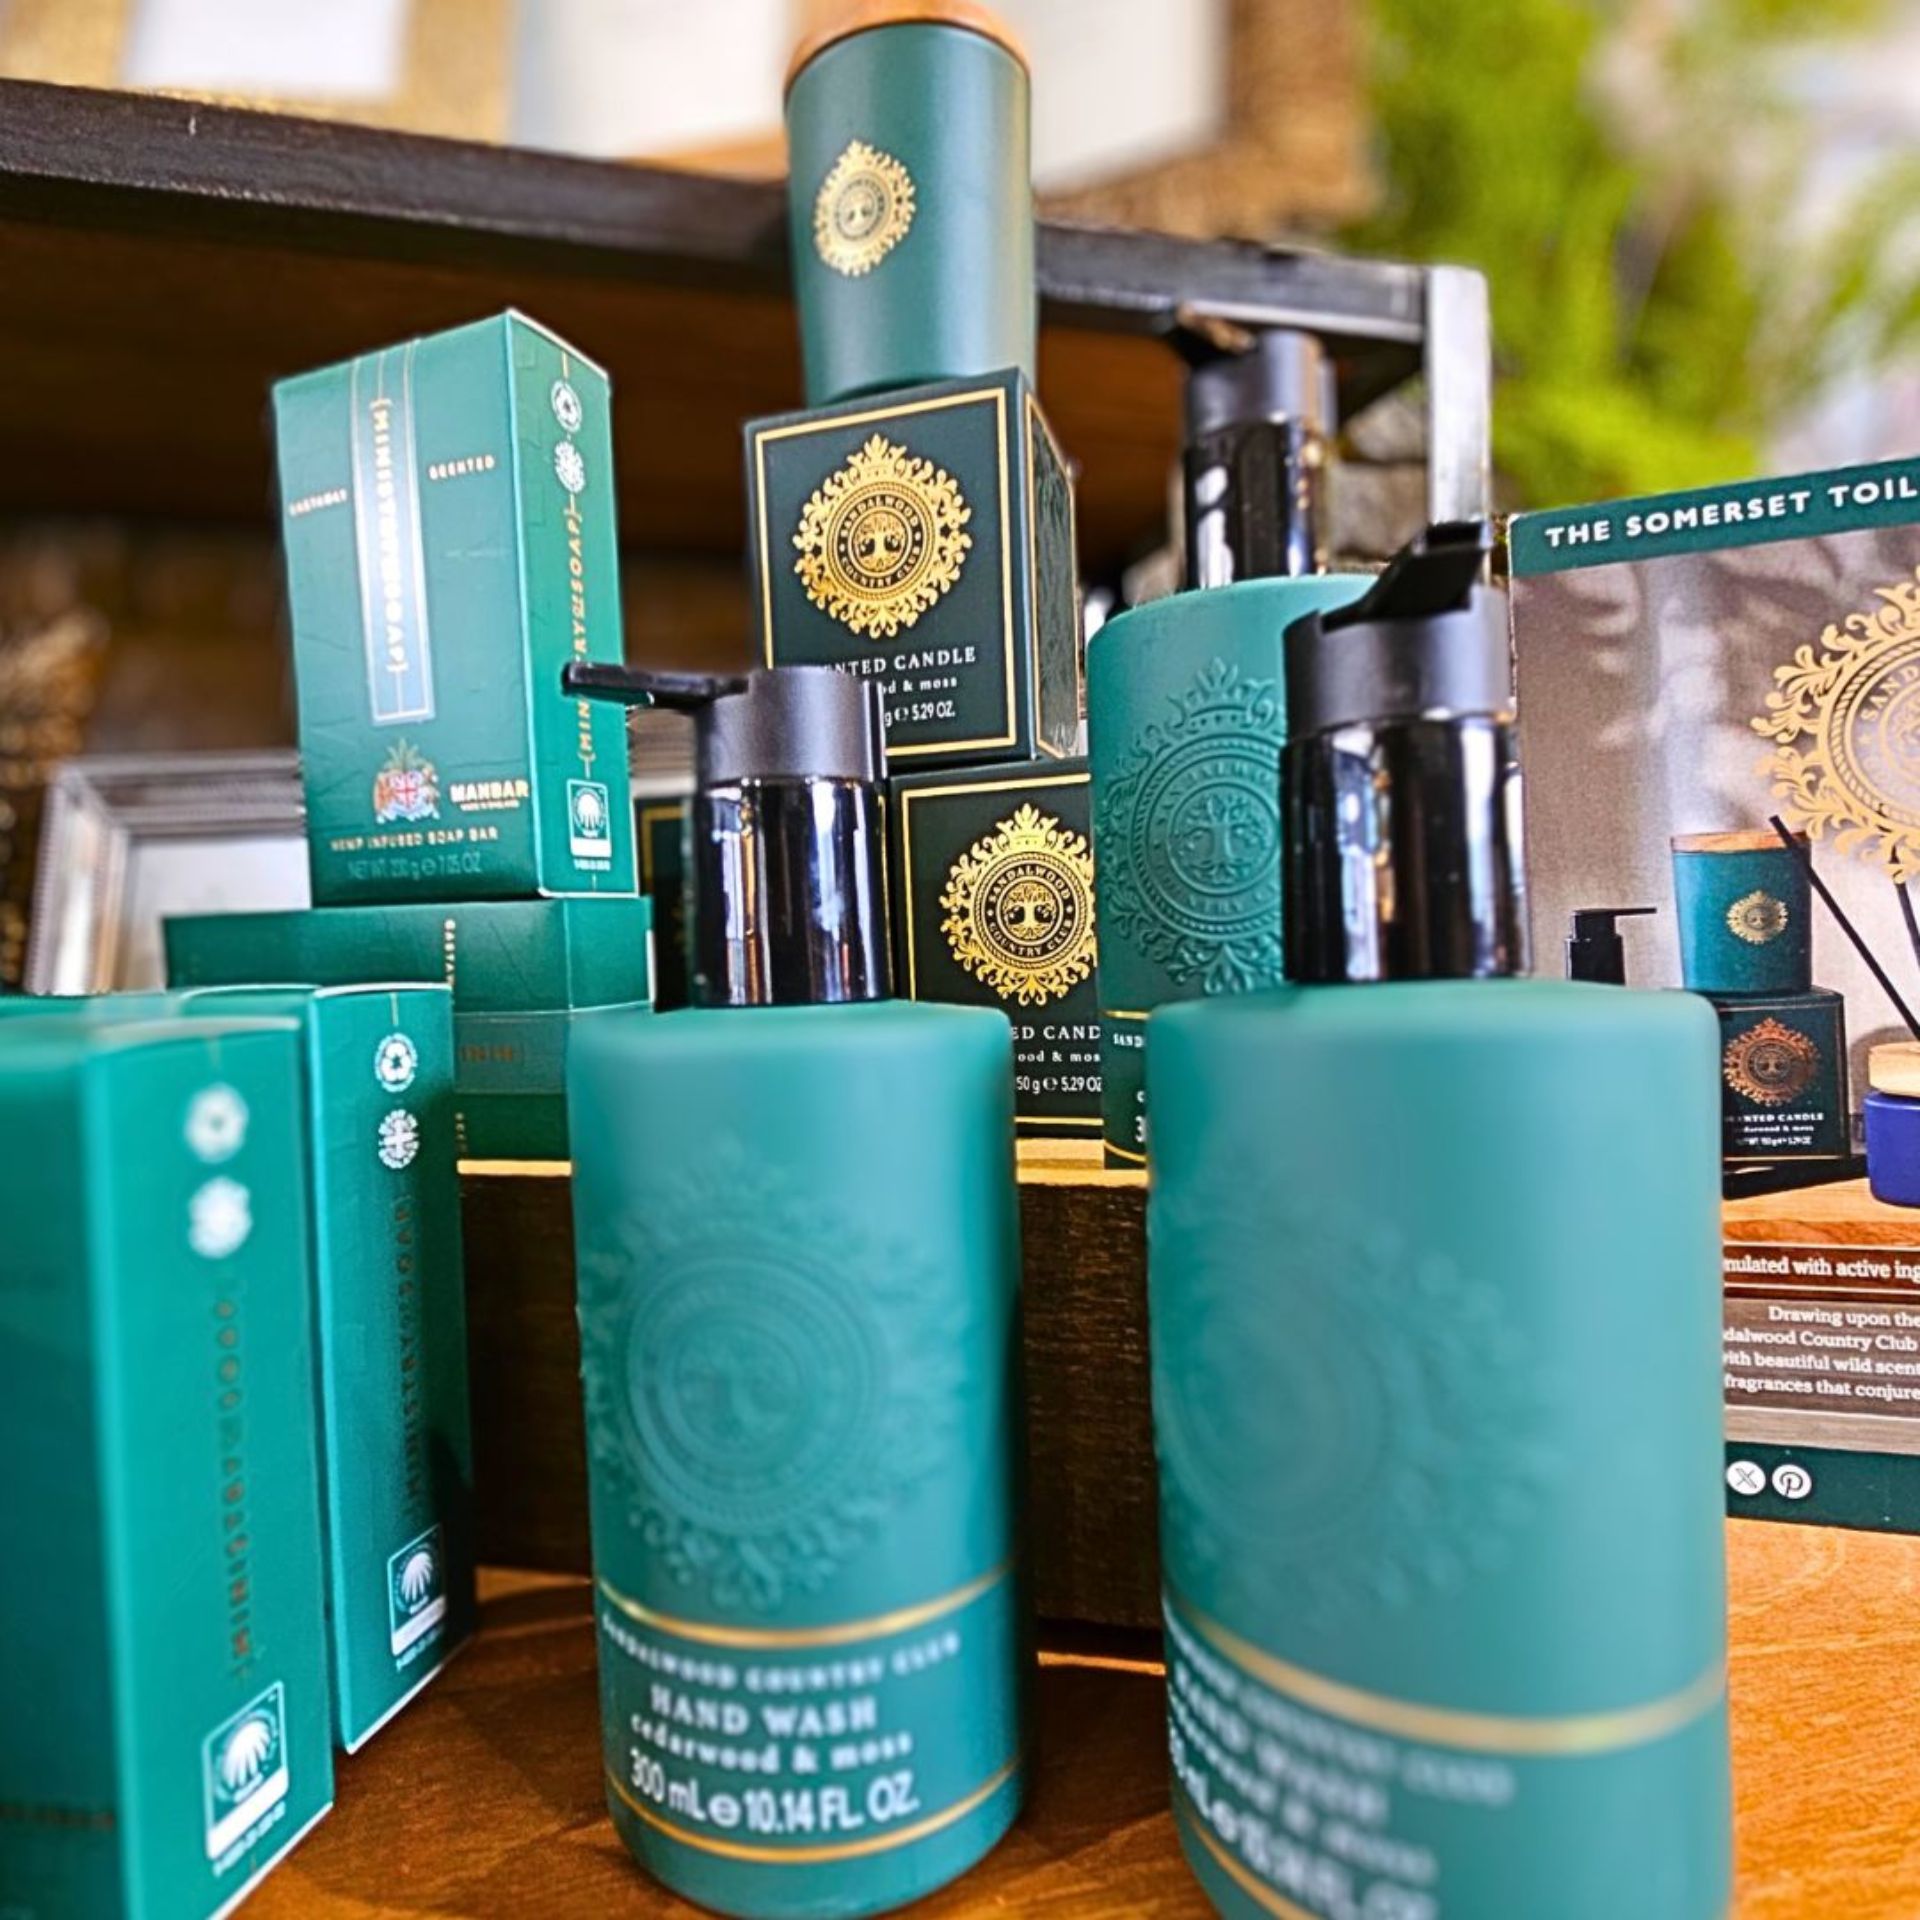 A display of luxury skin care products for Father's Day gifts